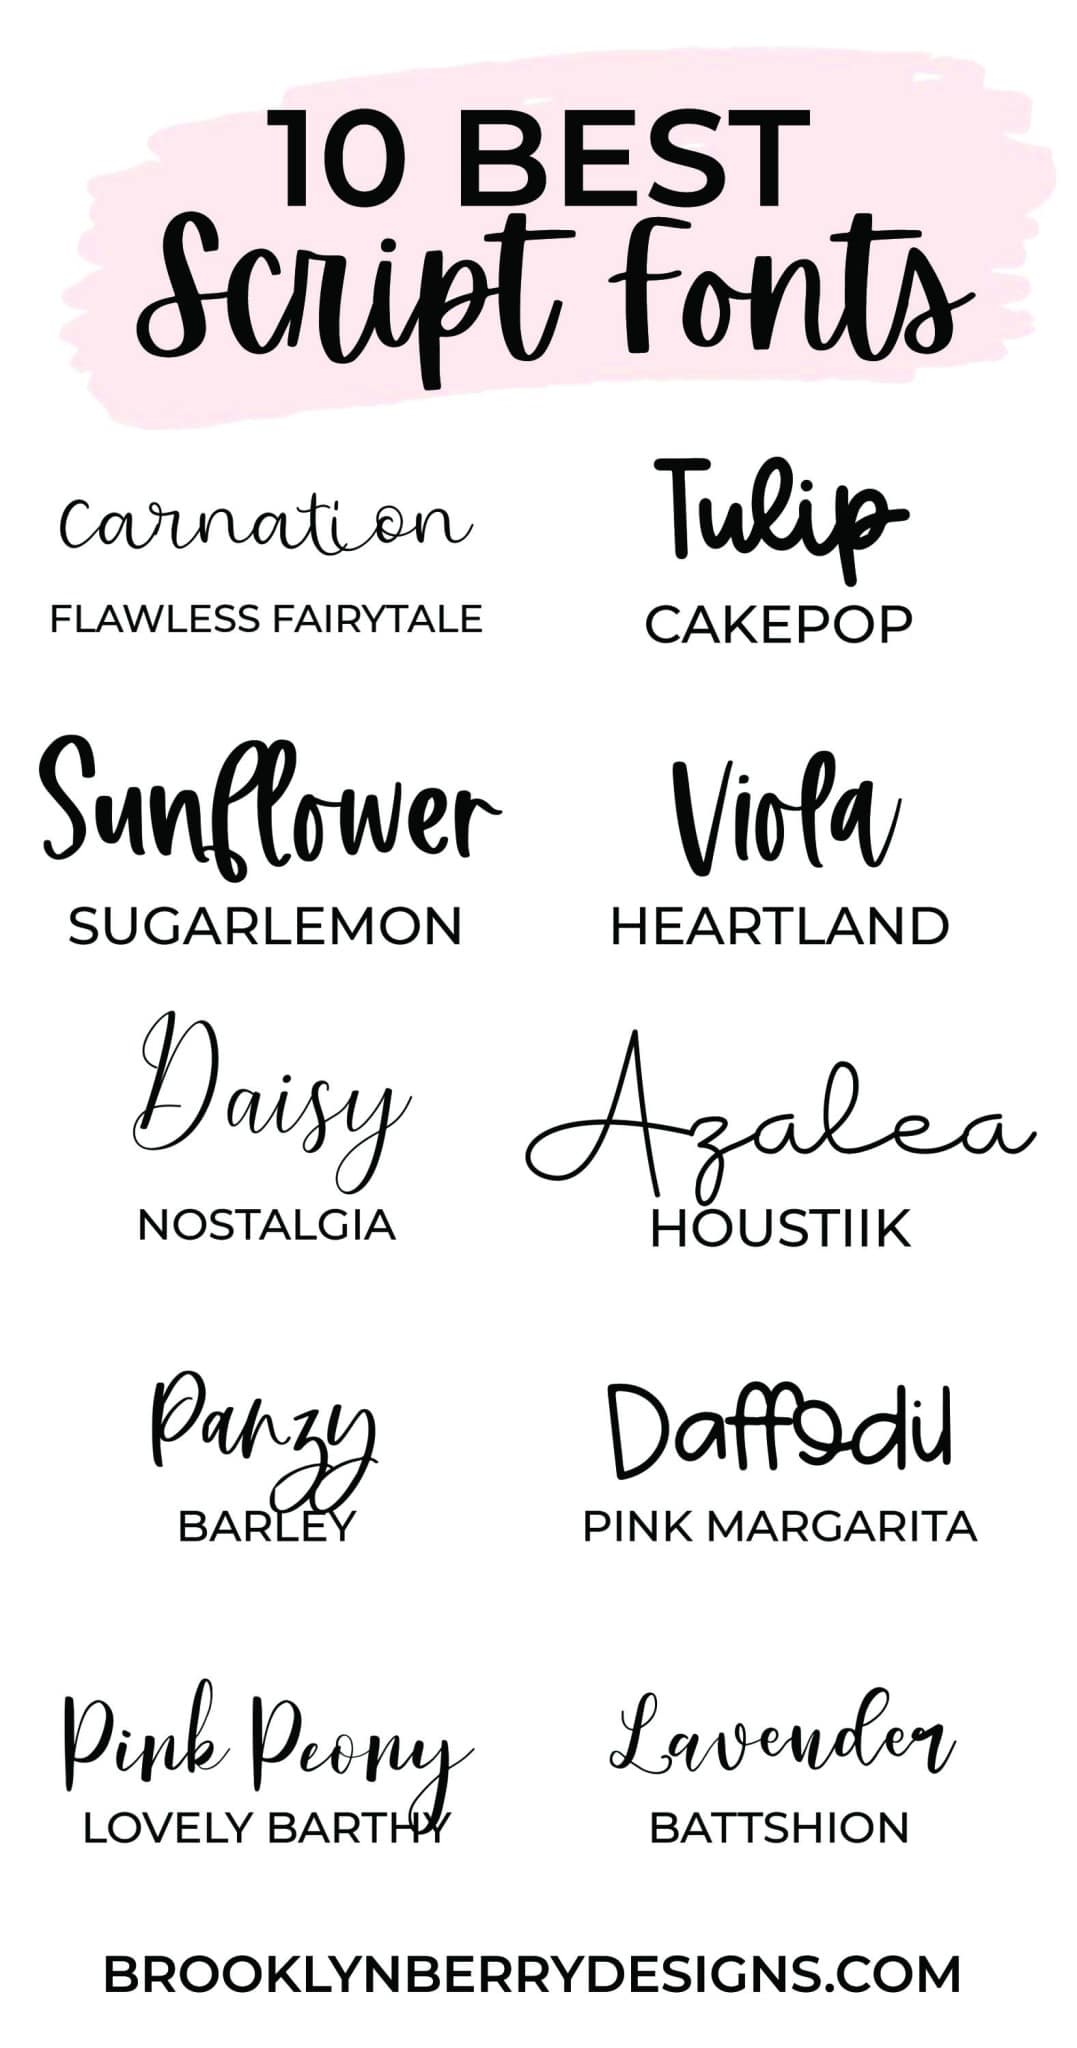 How to pair fonts to create beautiful pinterest images to drive traffic to your site. via @brookeberry